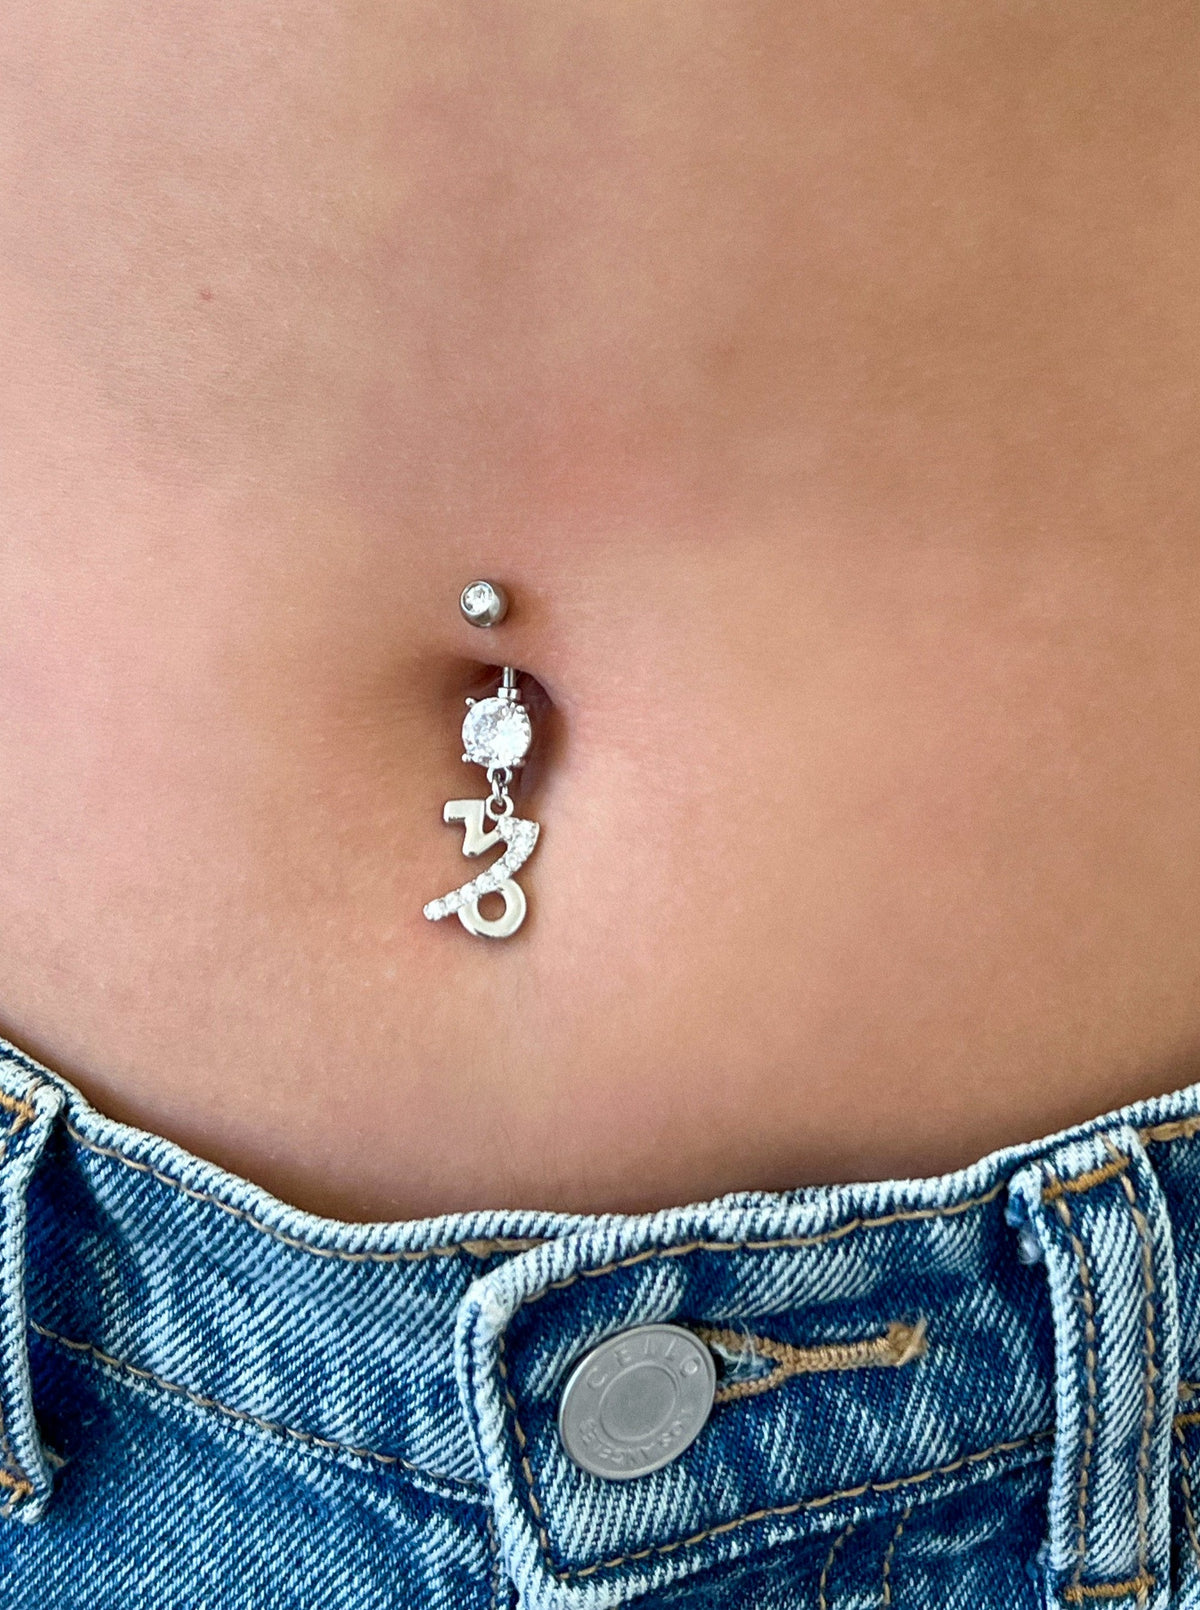 Belly Button Piercing's Code & Price - RblxTrade